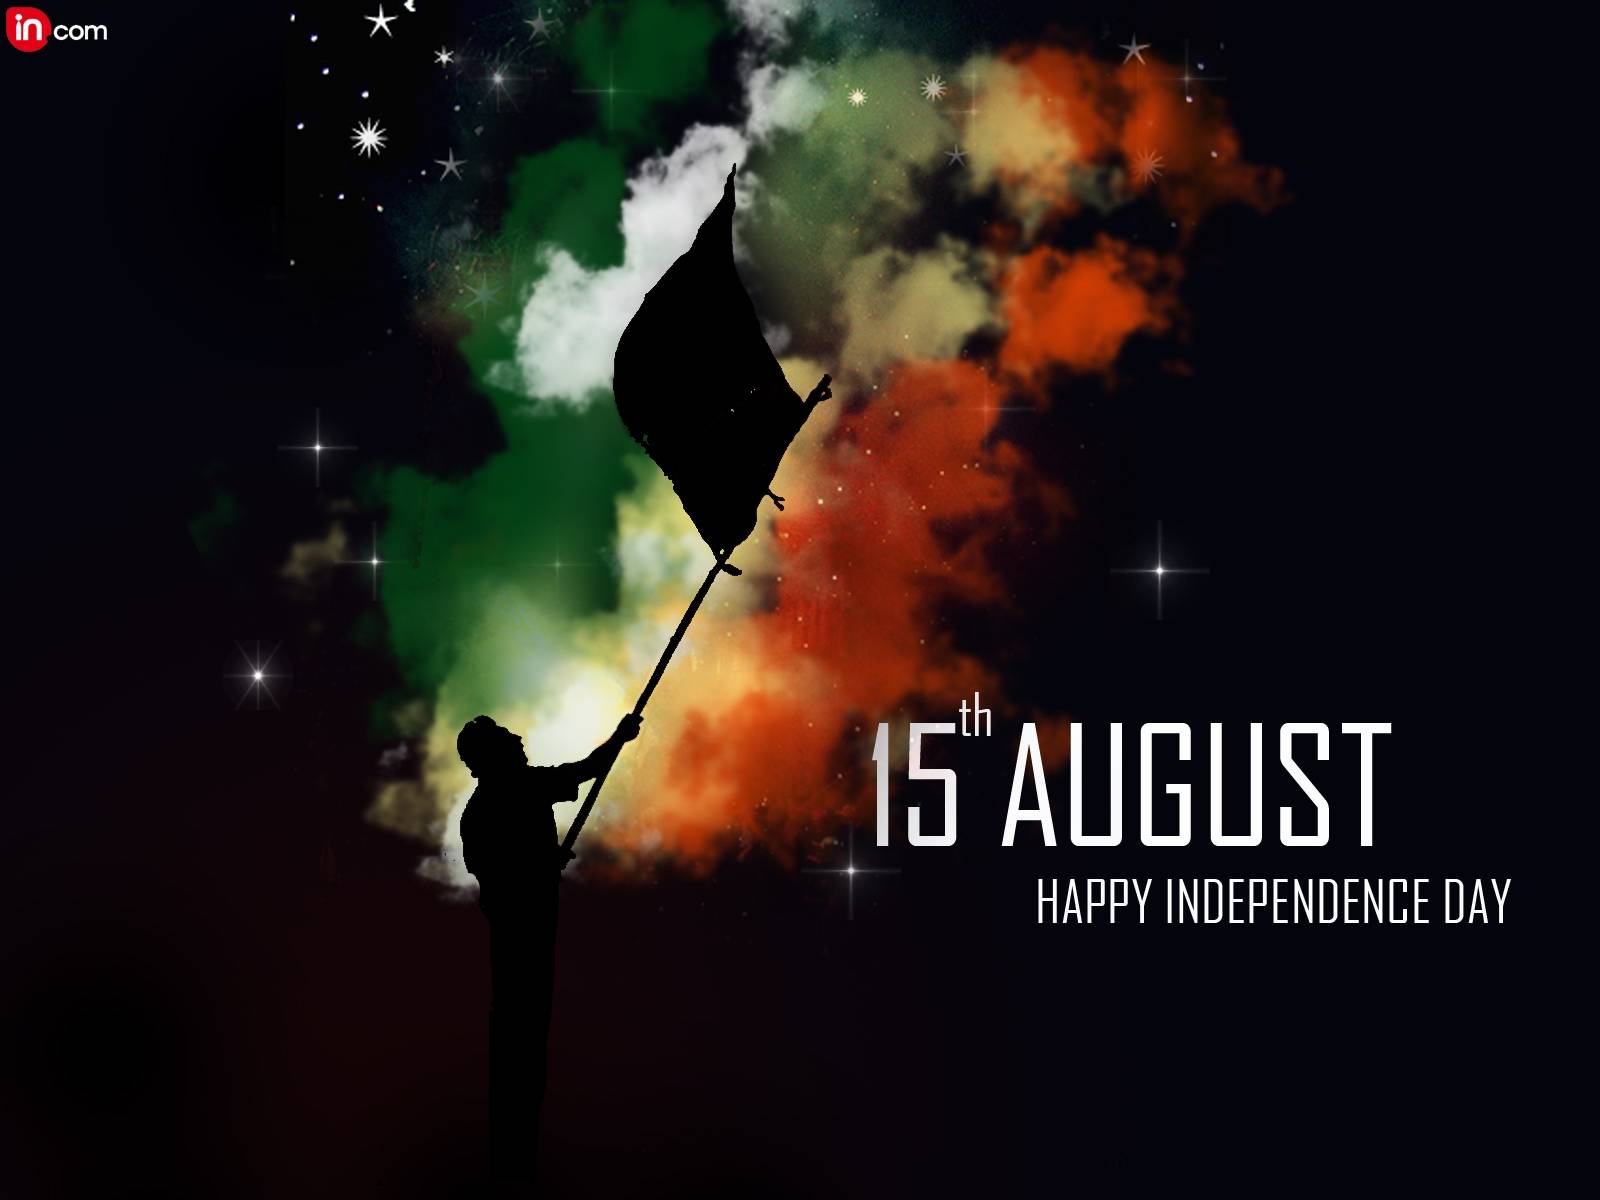 Indian Flag Hd Wallpaper 15 August - Happy Independence Day Unique - HD Wallpaper 